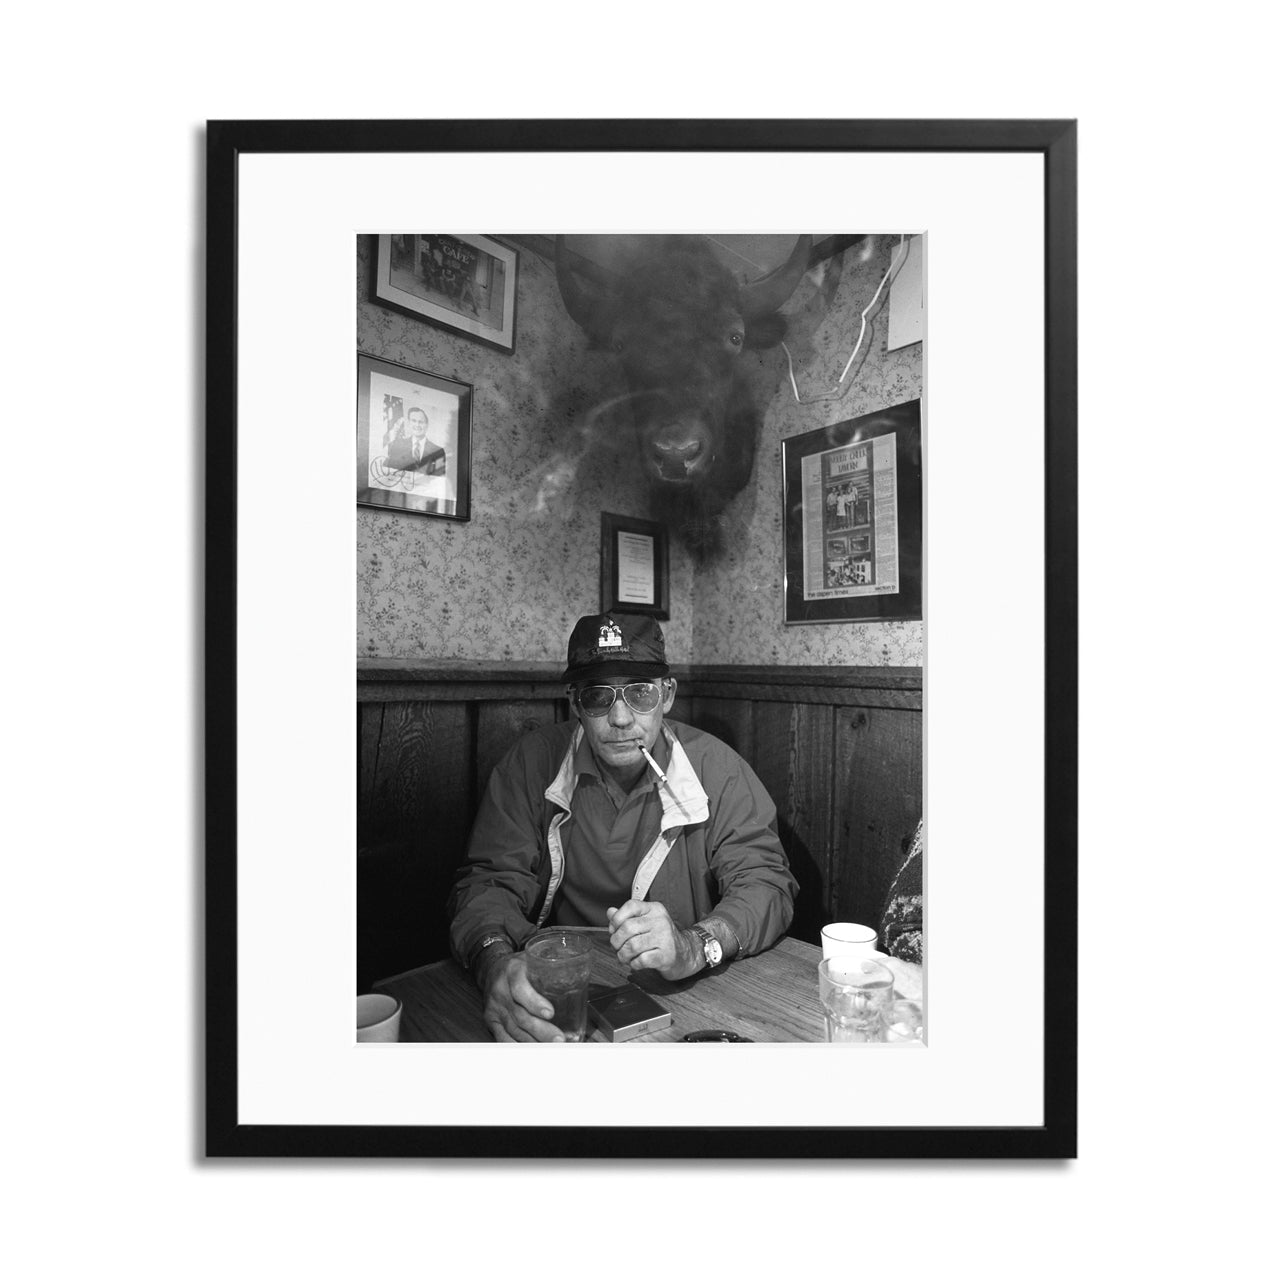 Hunter S. Thompson at The Woody Creek Framed Print